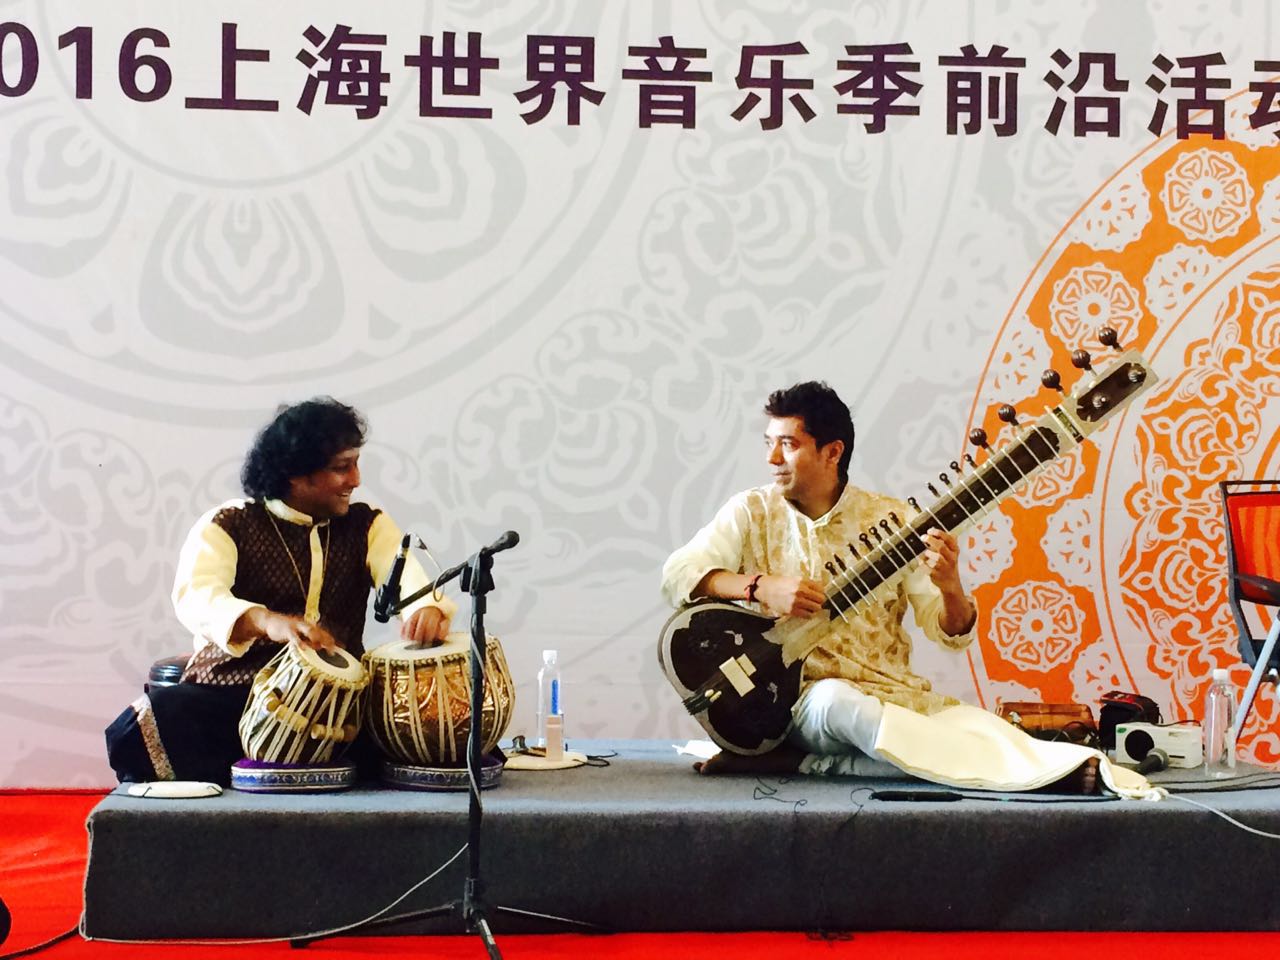 Workshop collaboration with World Music Festival